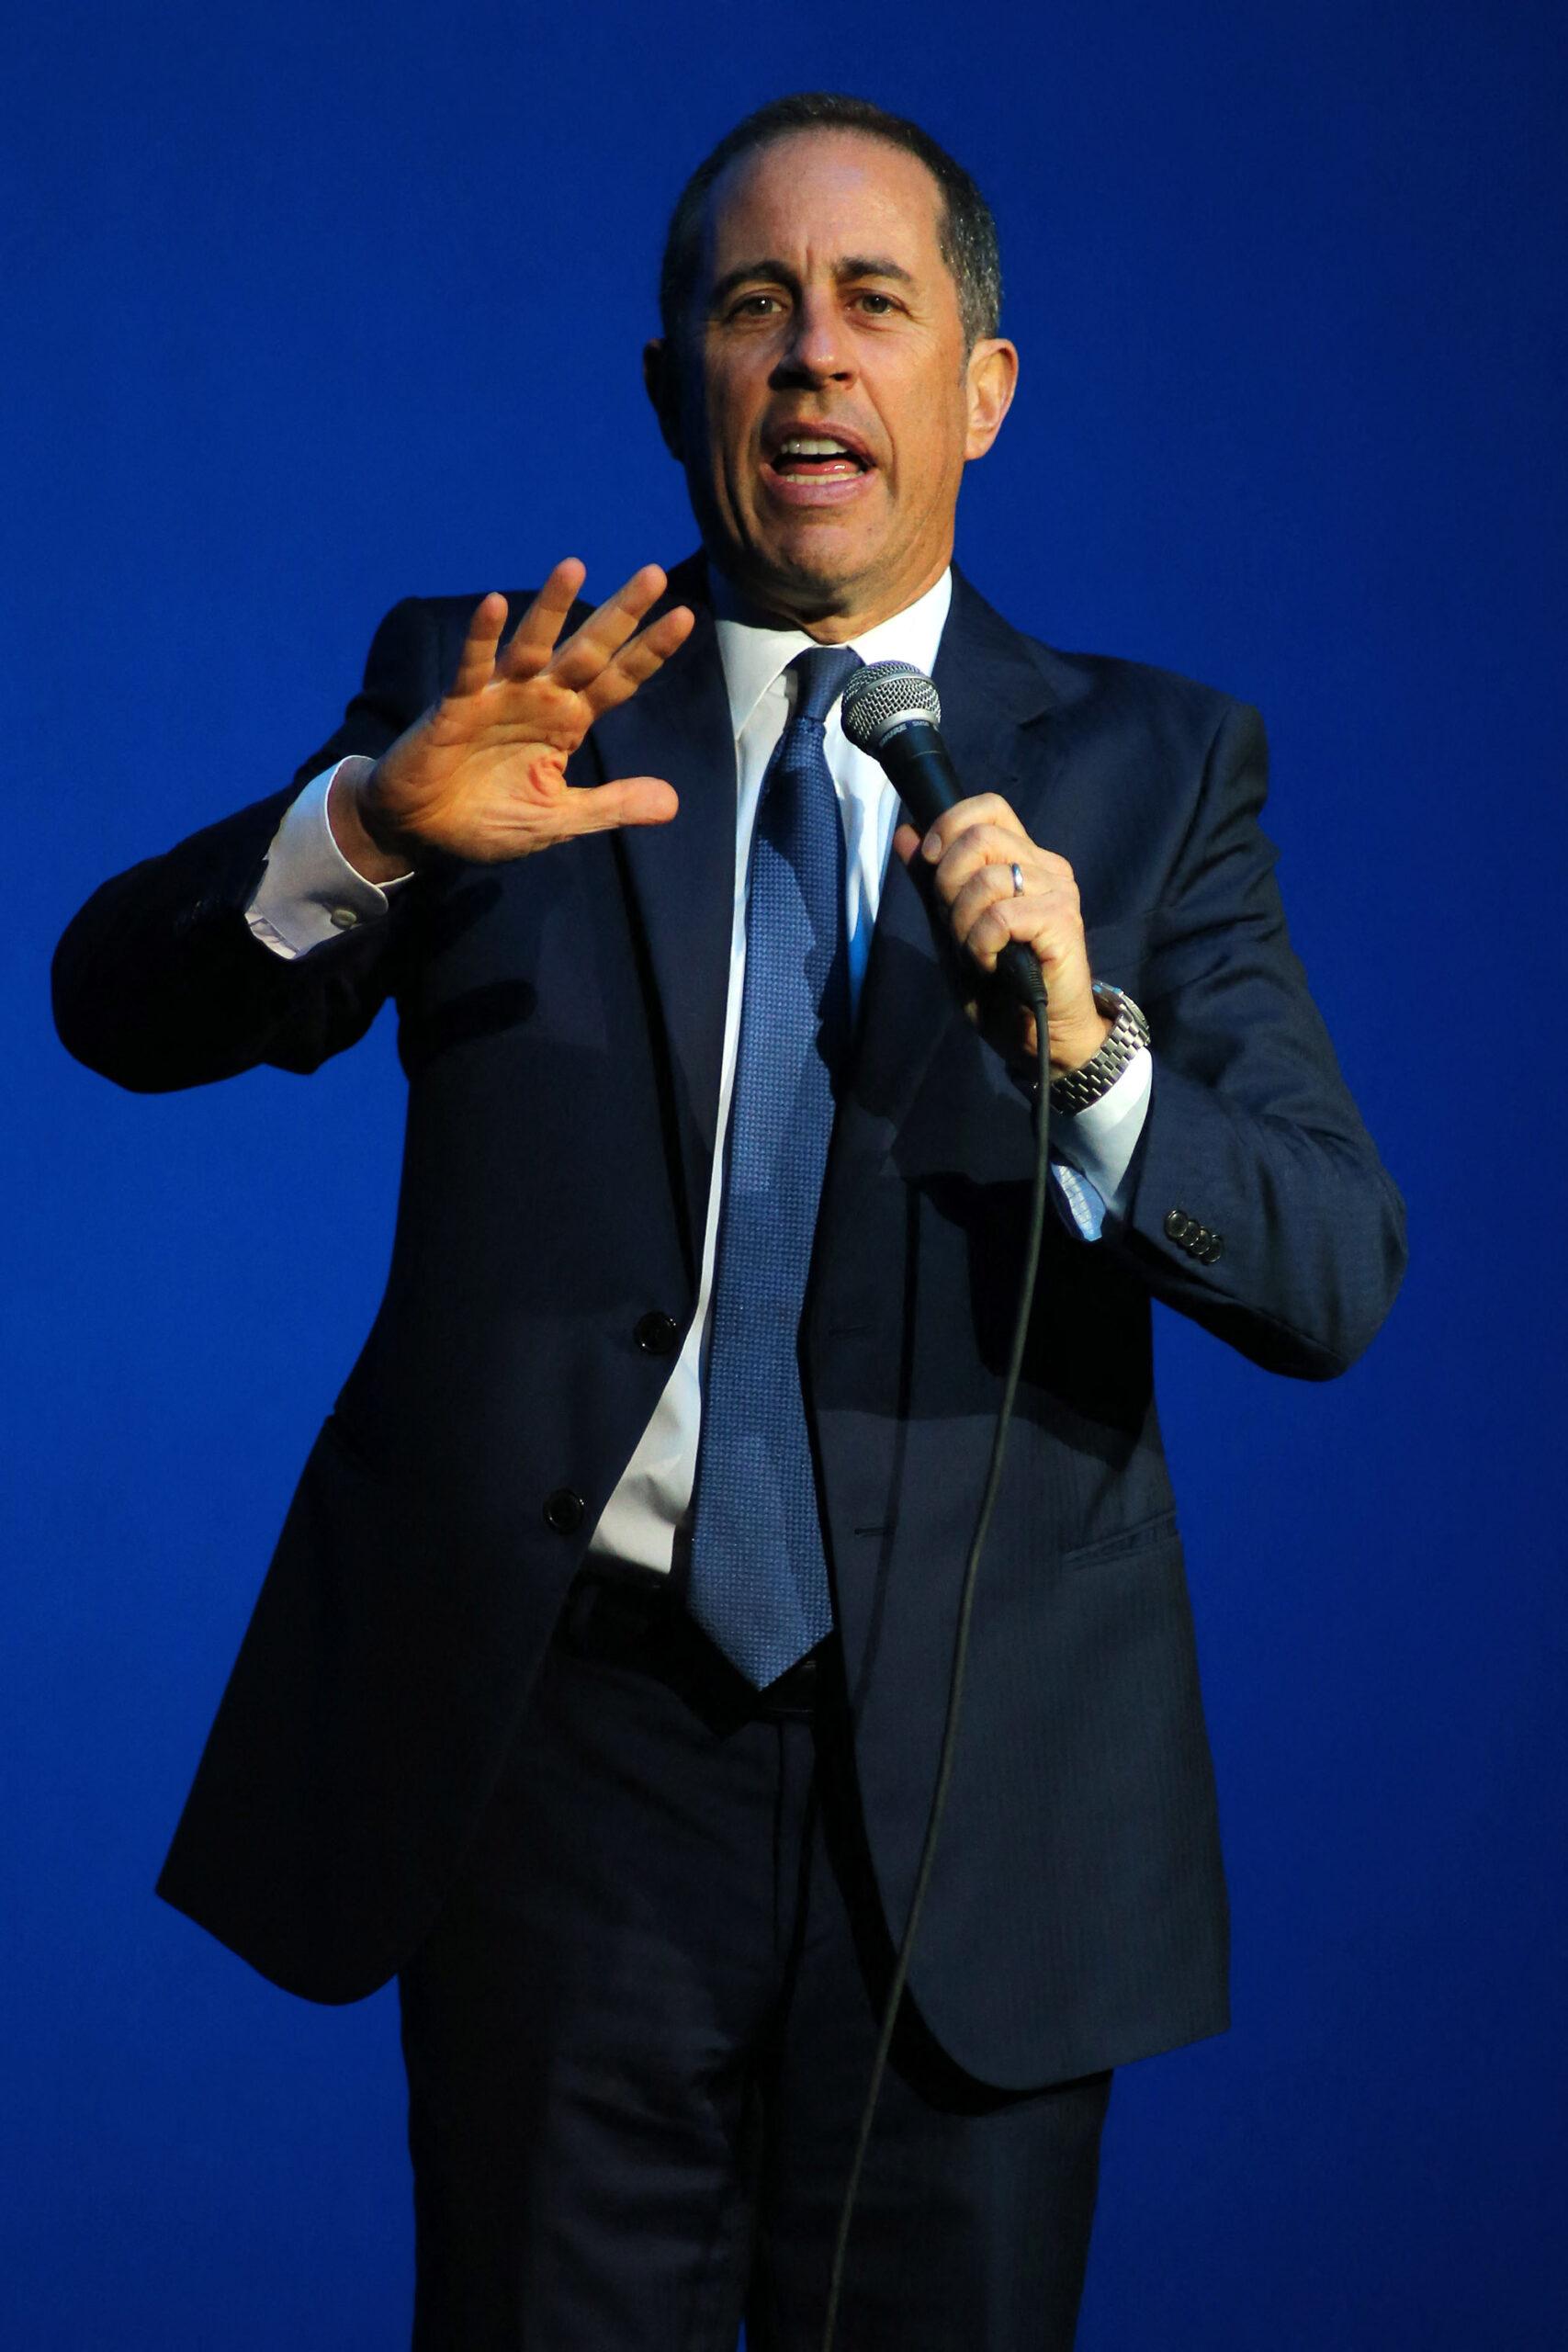 Jerry Seinfeld performs at Hard Rock Live at the Seminole Hard Rock Hotel and Casino in Hollywood, FL